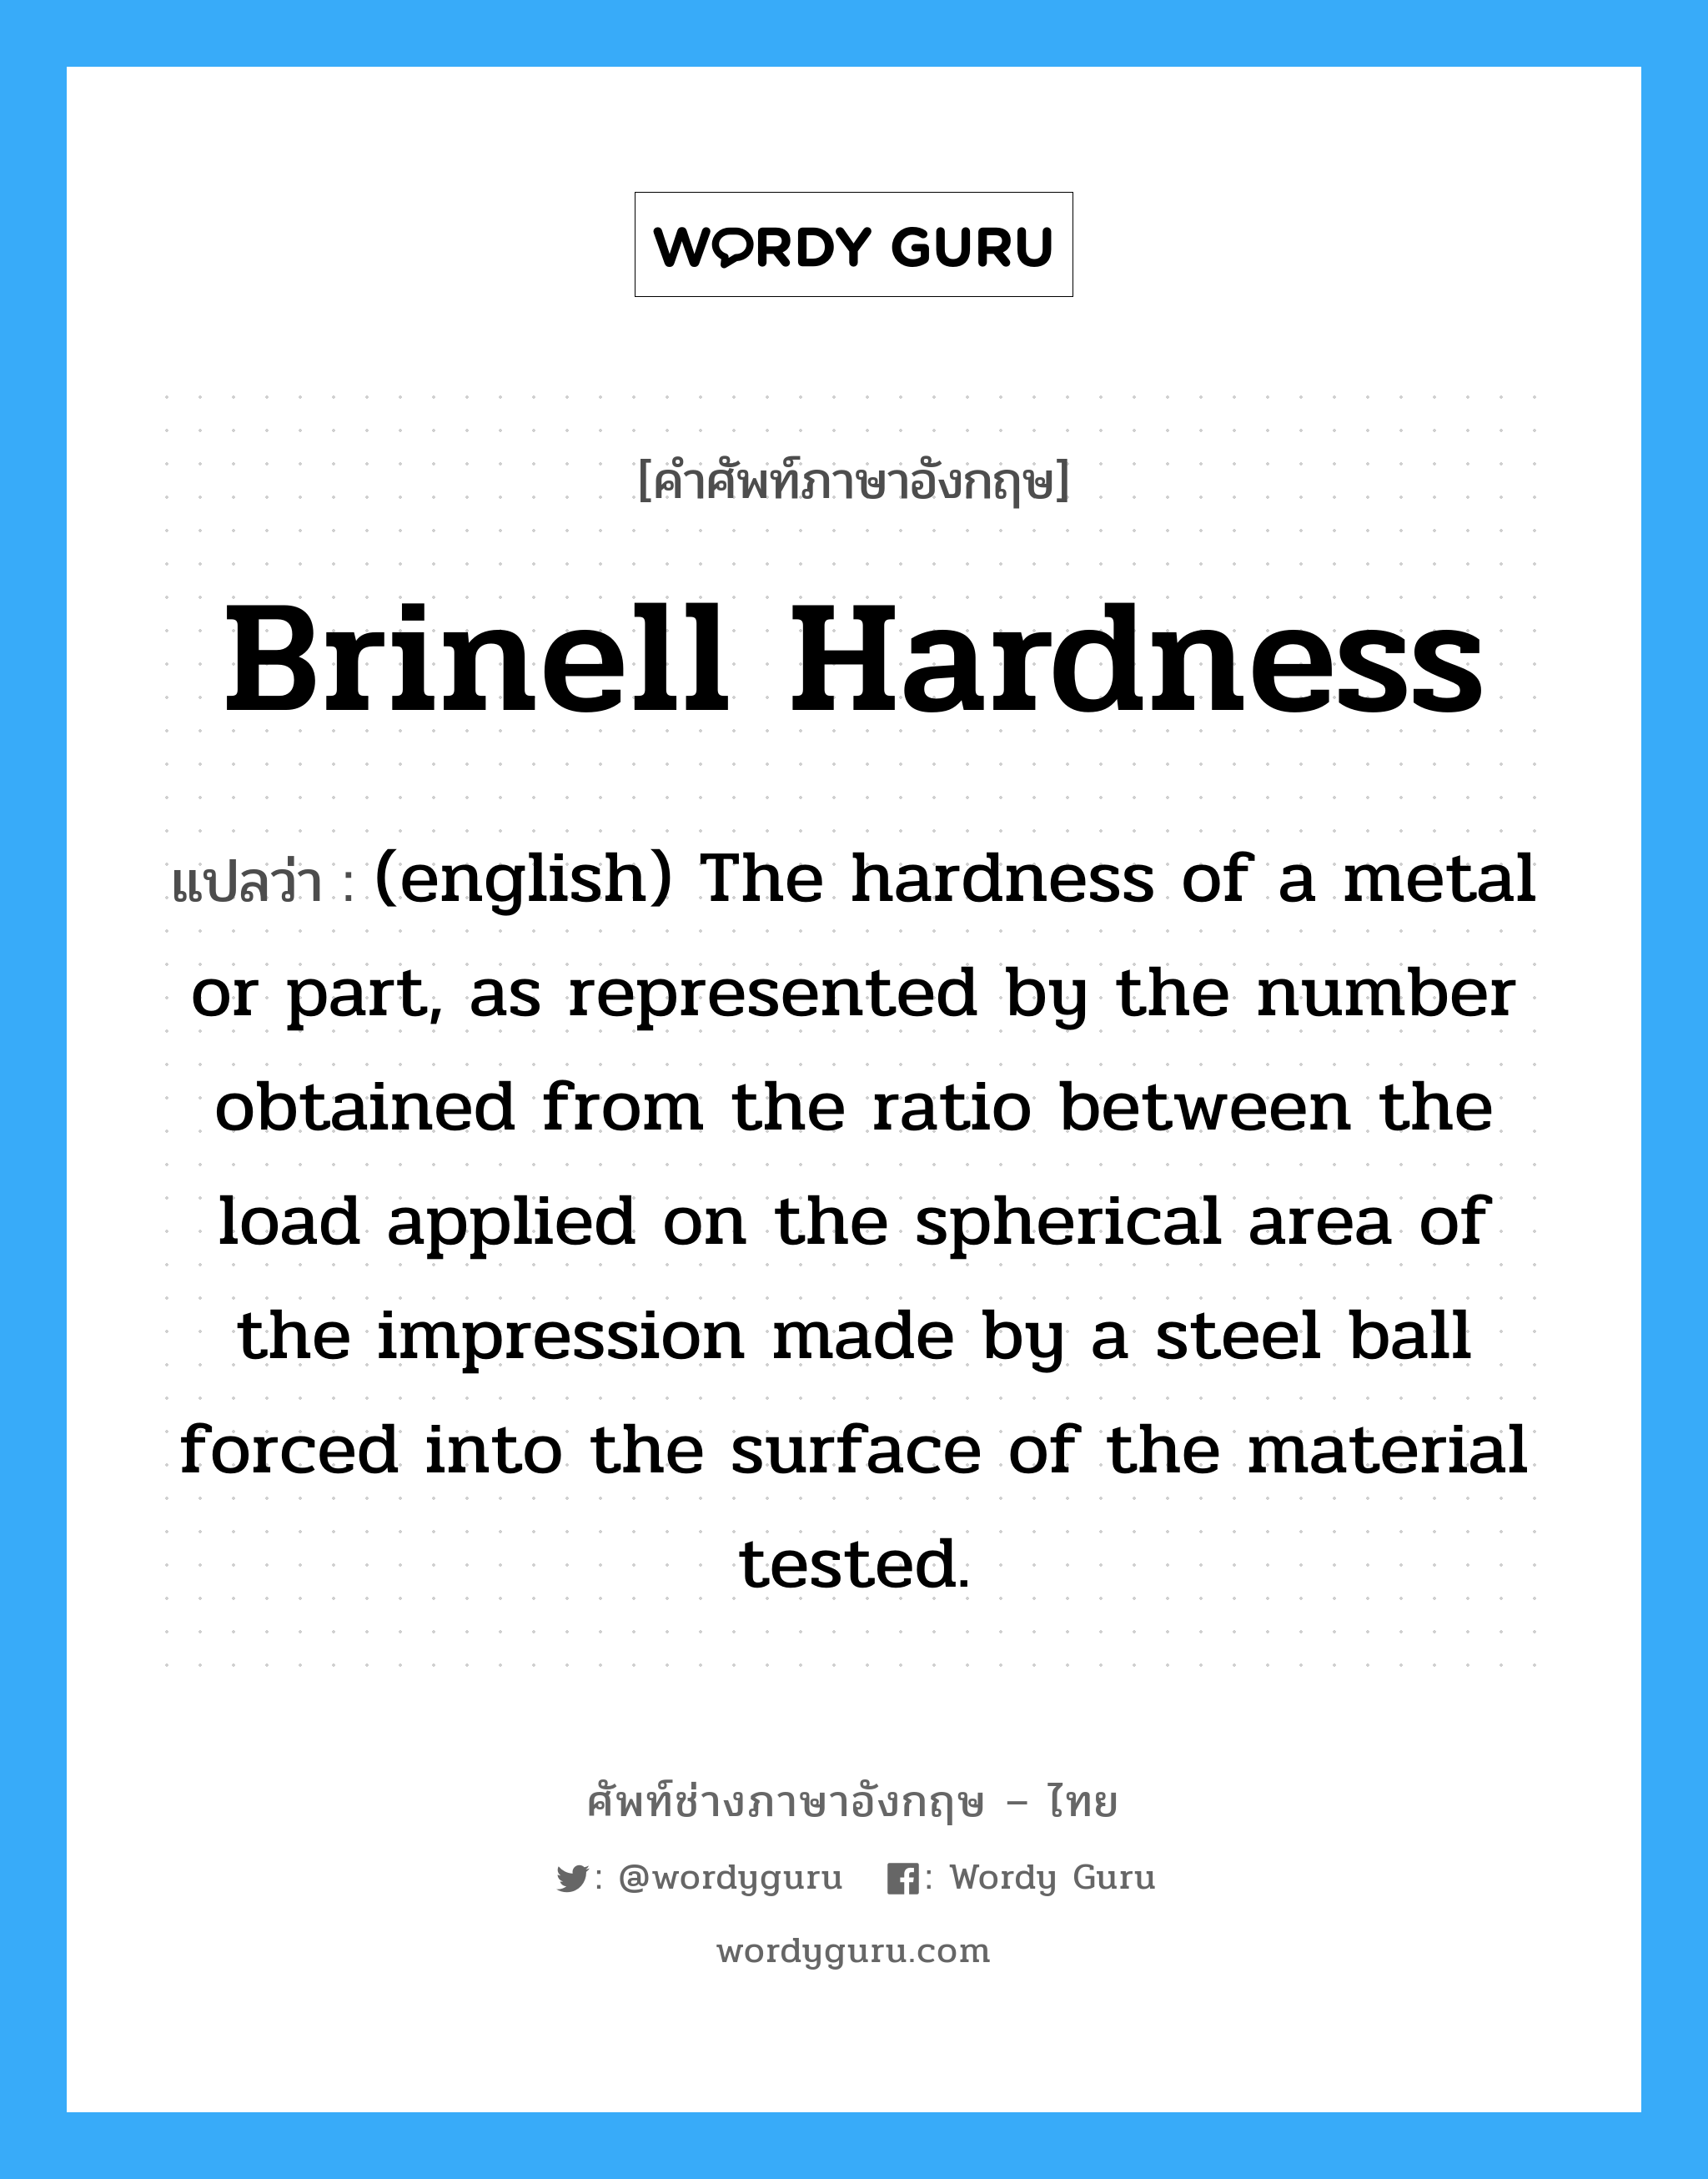 (english) The hardness of a metal or part, as represented by the number obtained from the ratio between the load applied on the spherical area of the impression made by a steel ball forced into the surface of the material tested. ภาษาอังกฤษ?, คำศัพท์ช่างภาษาอังกฤษ - ไทย (english) The hardness of a metal or part, as represented by the number obtained from the ratio between the load applied on the spherical area of the impression made by a steel ball forced into the surface of the material tested. คำศัพท์ภาษาอังกฤษ (english) The hardness of a metal or part, as represented by the number obtained from the ratio between the load applied on the spherical area of the impression made by a steel ball forced into the surface of the material tested. แปลว่า Brinell Hardness